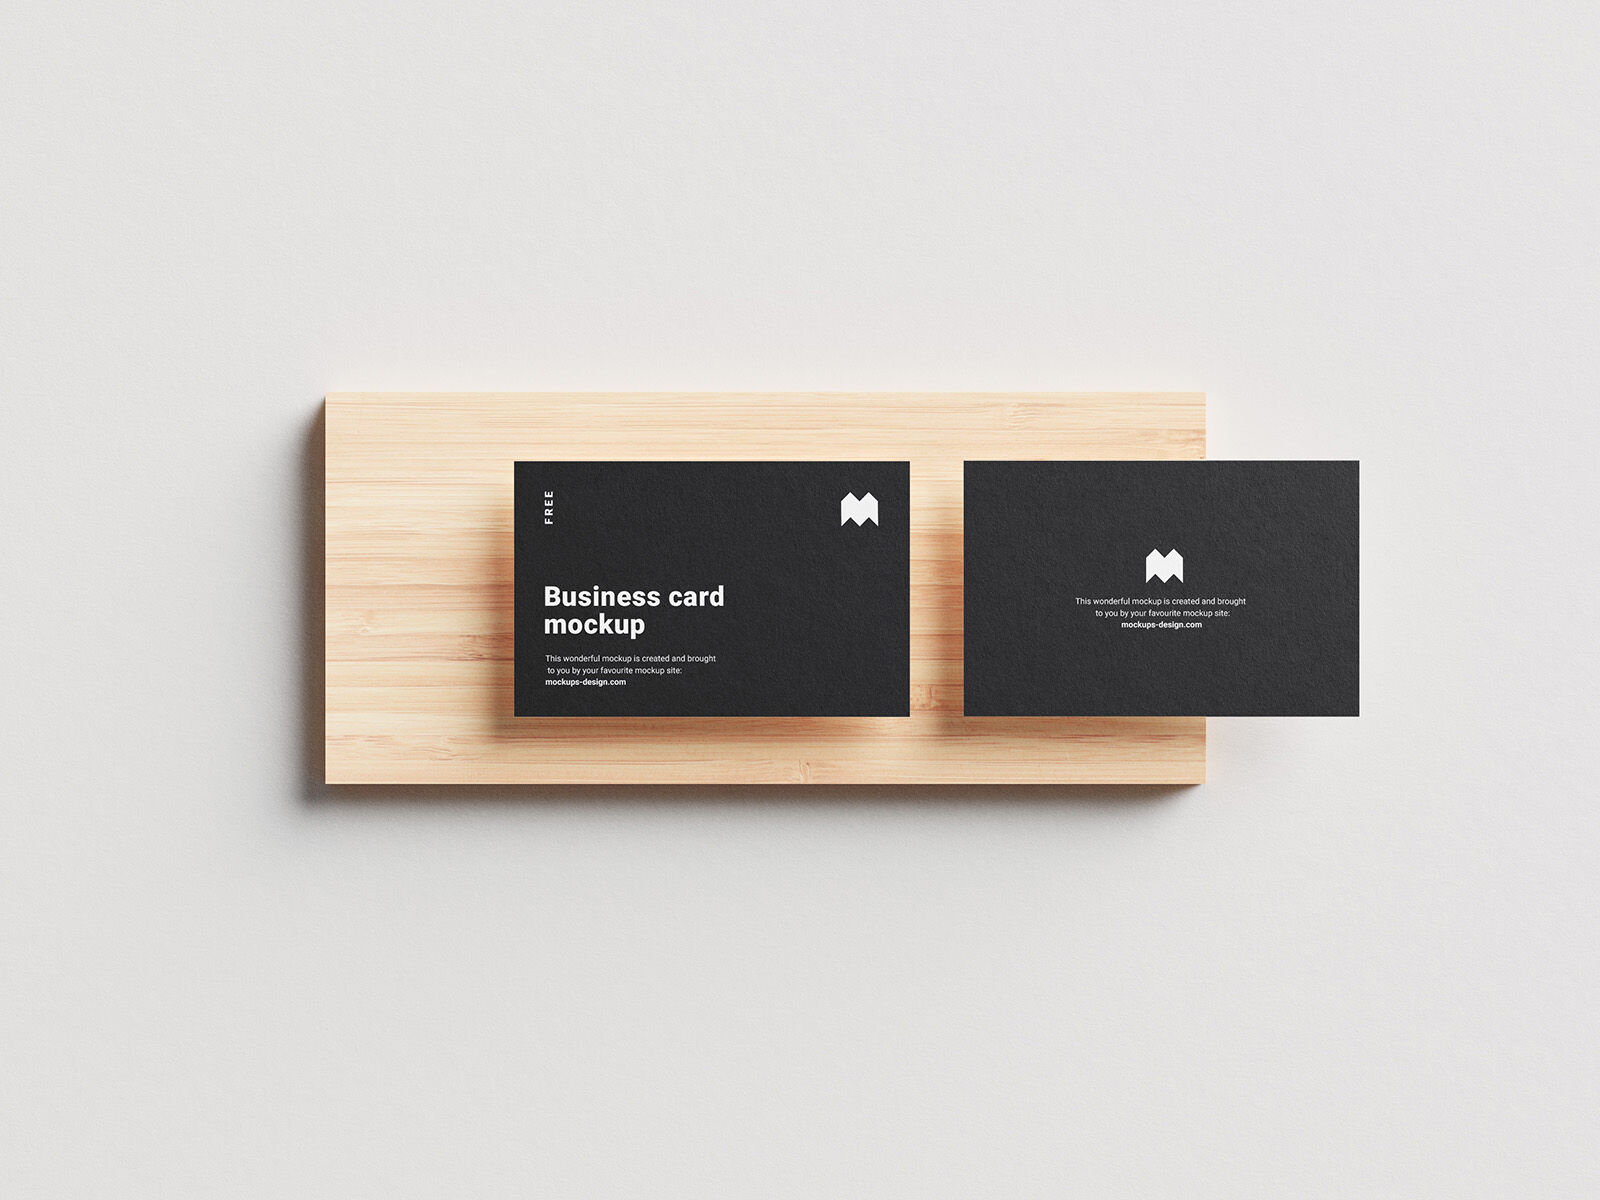 5 Mockups of Floating Business Cards Along with a Wooden Board FREE PSD